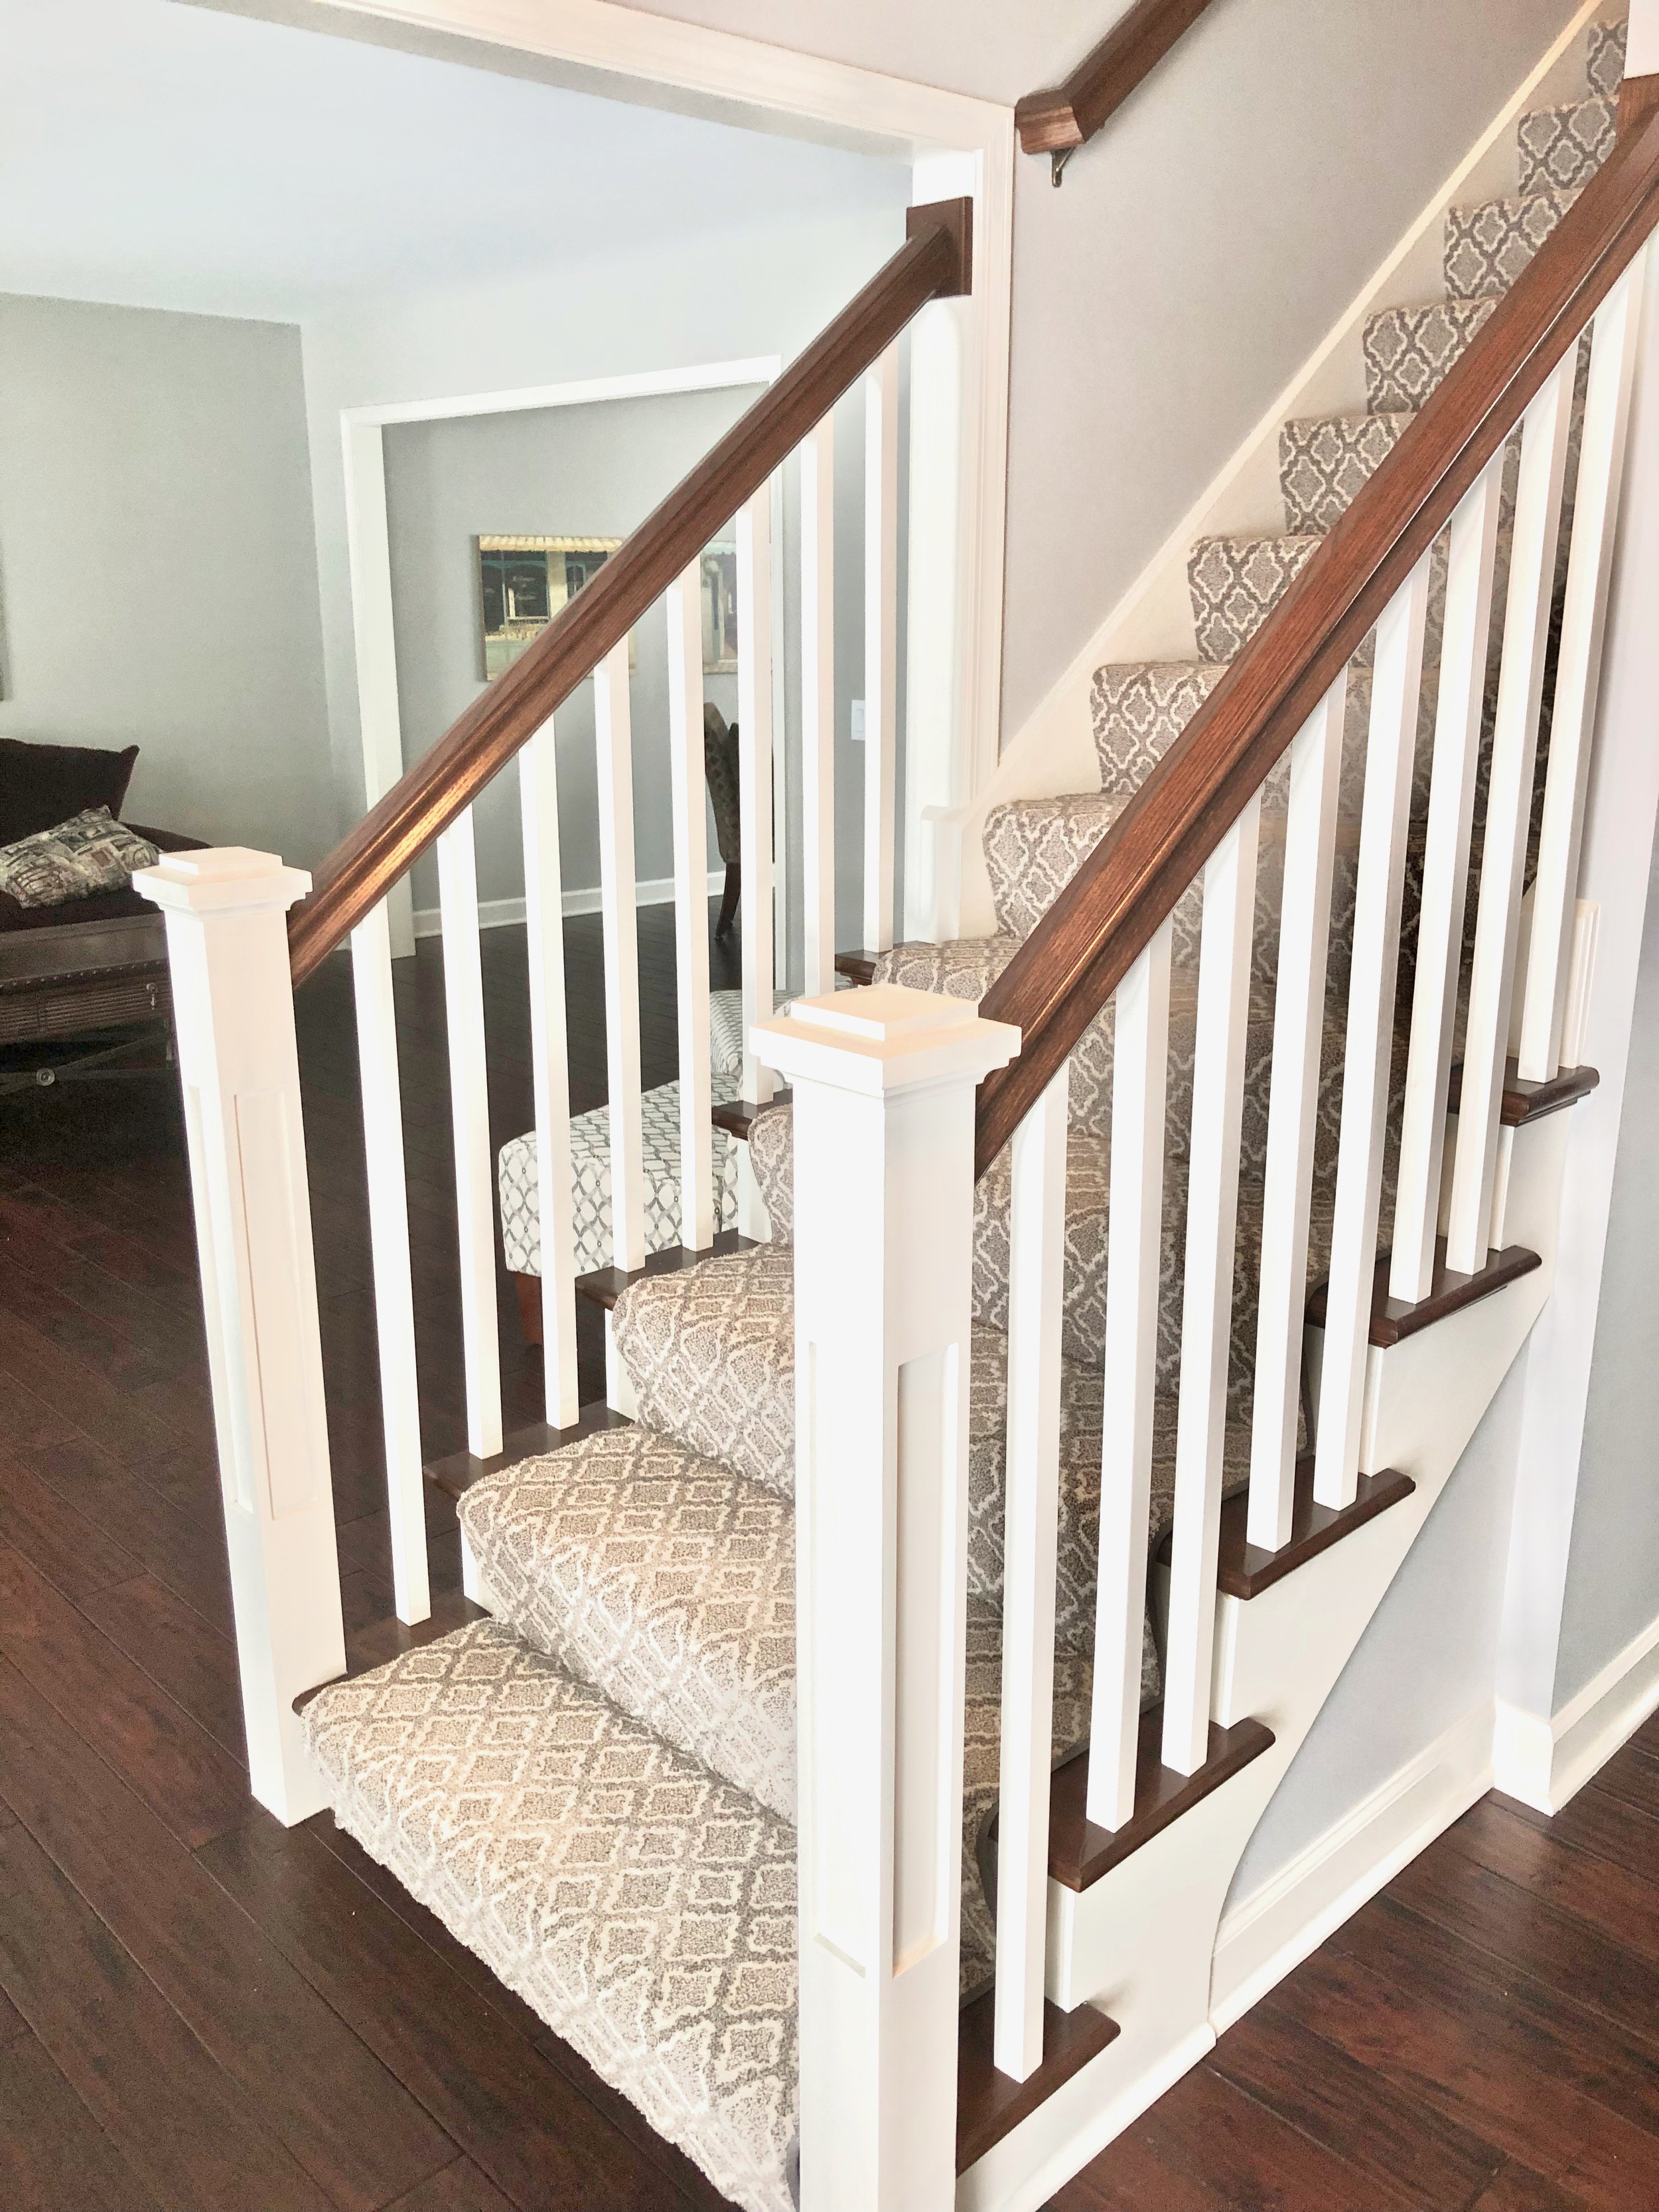 Naperville Stair Case &amp; Foyer Remodeling. New Handrails and Square Balusters.  Painted White